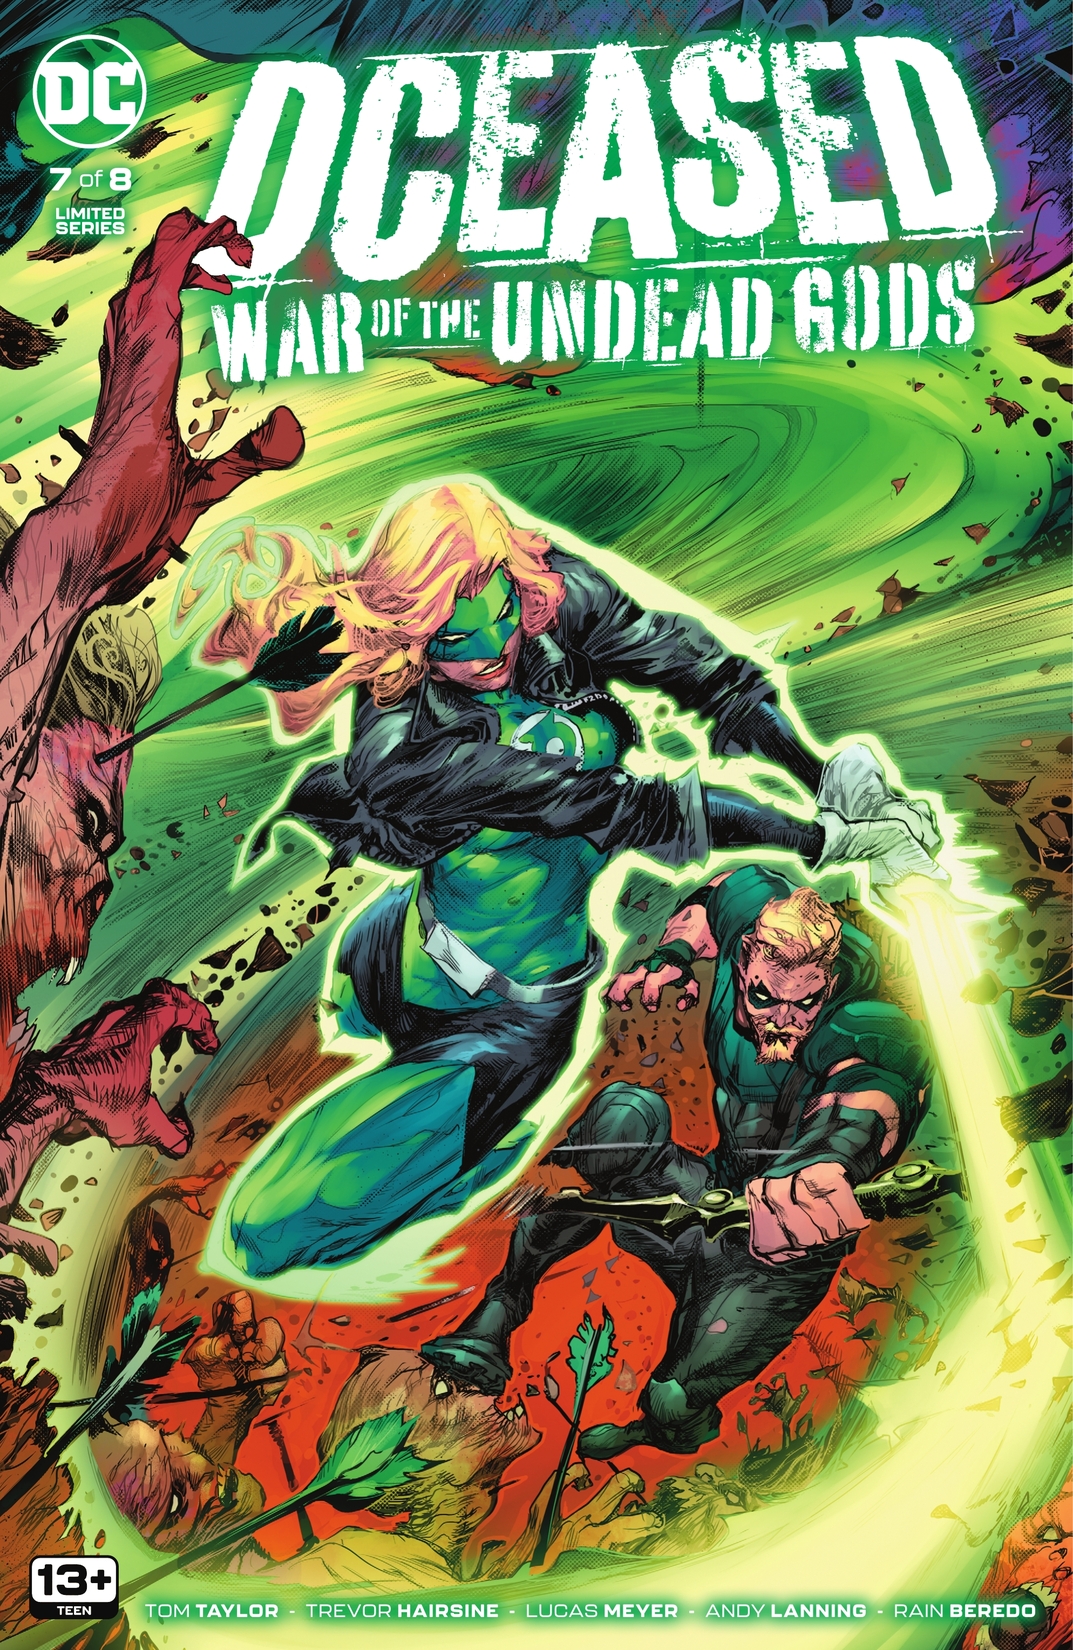 DCeased: War of the Undead Gods #7 preview images